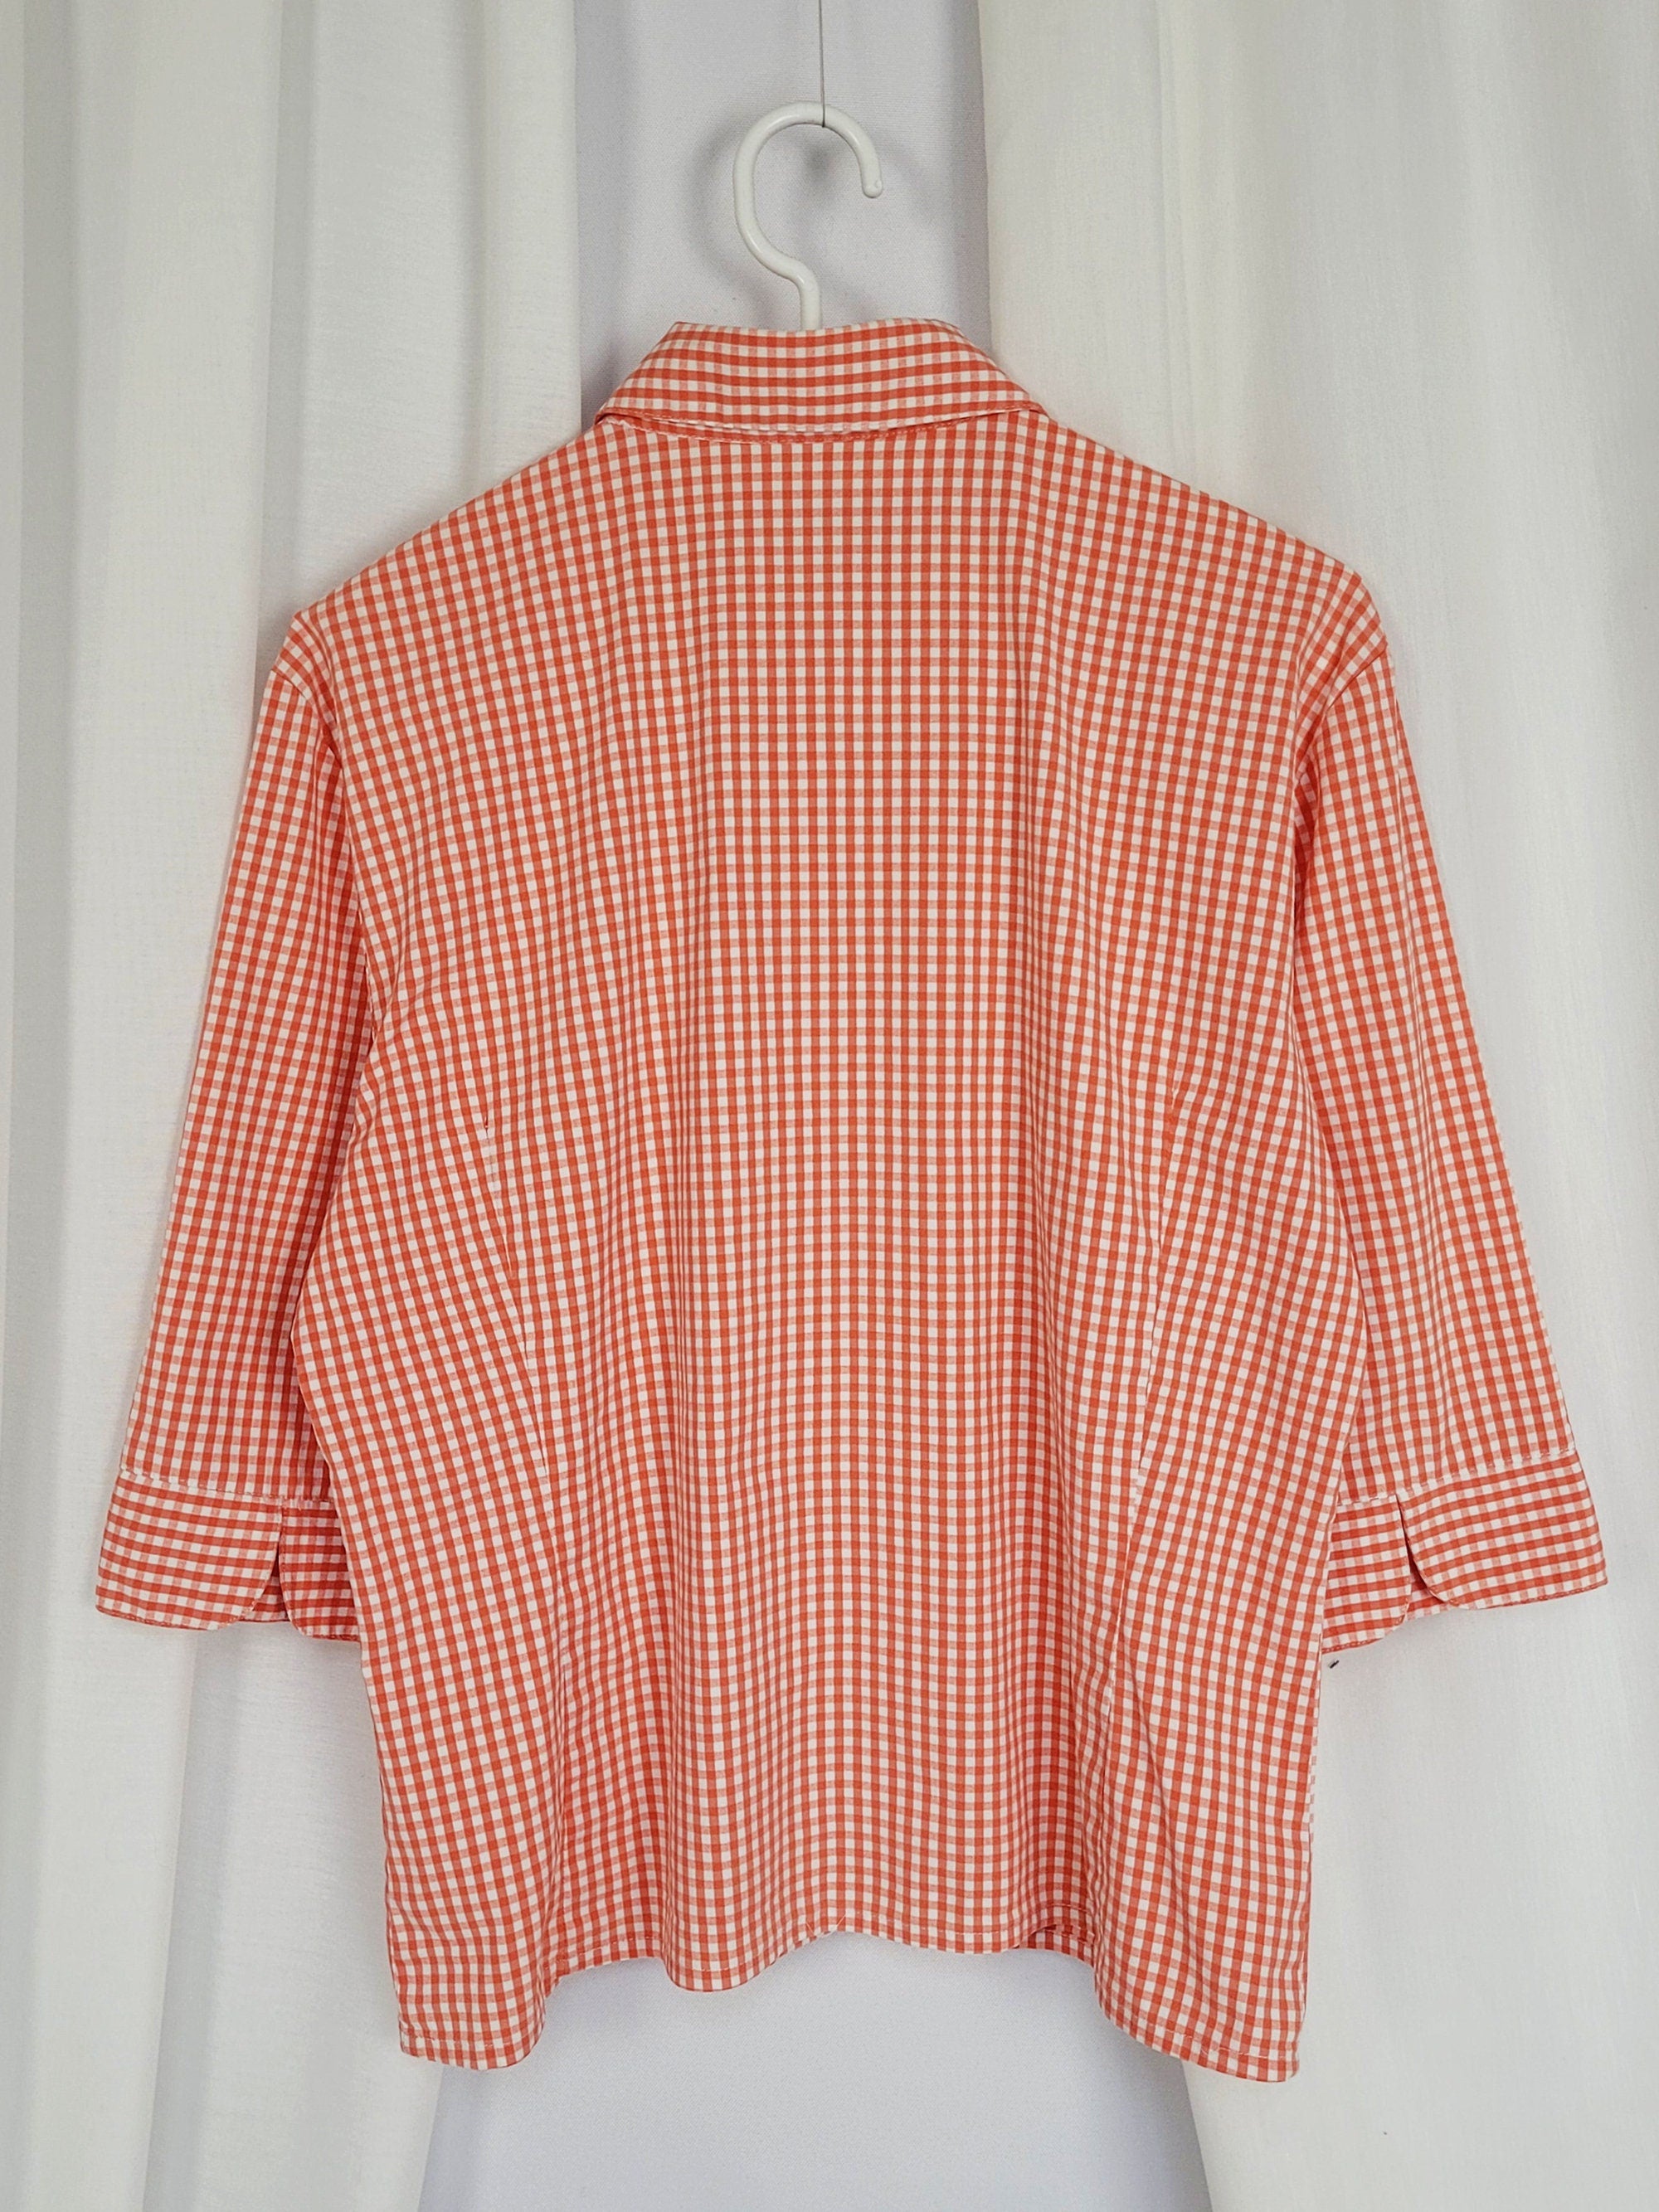 Retro Esprit 90s red minimalist checked 3/4 sleeve shirt blouse top